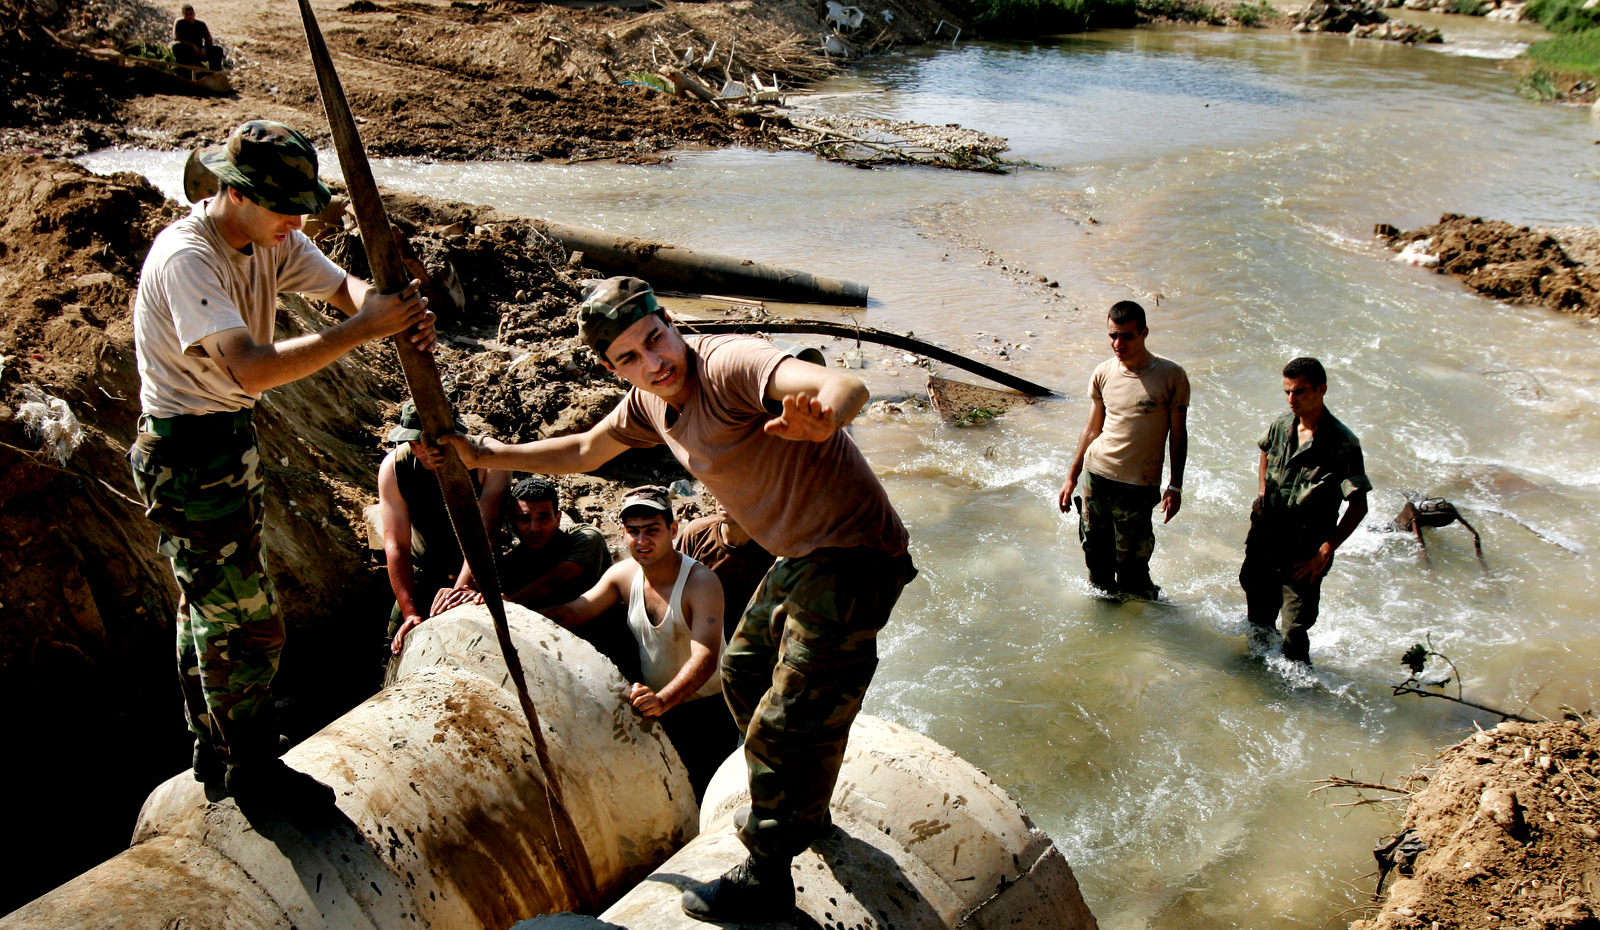 Lebanese soldiers start work on diverting the Litani river a short distance to enable a more efficient road crossing between Sidon and Tyre in southern Lebanon during Israel's 2006 invasion, Aug. 15, 2006. (AP/Ben Curtis)